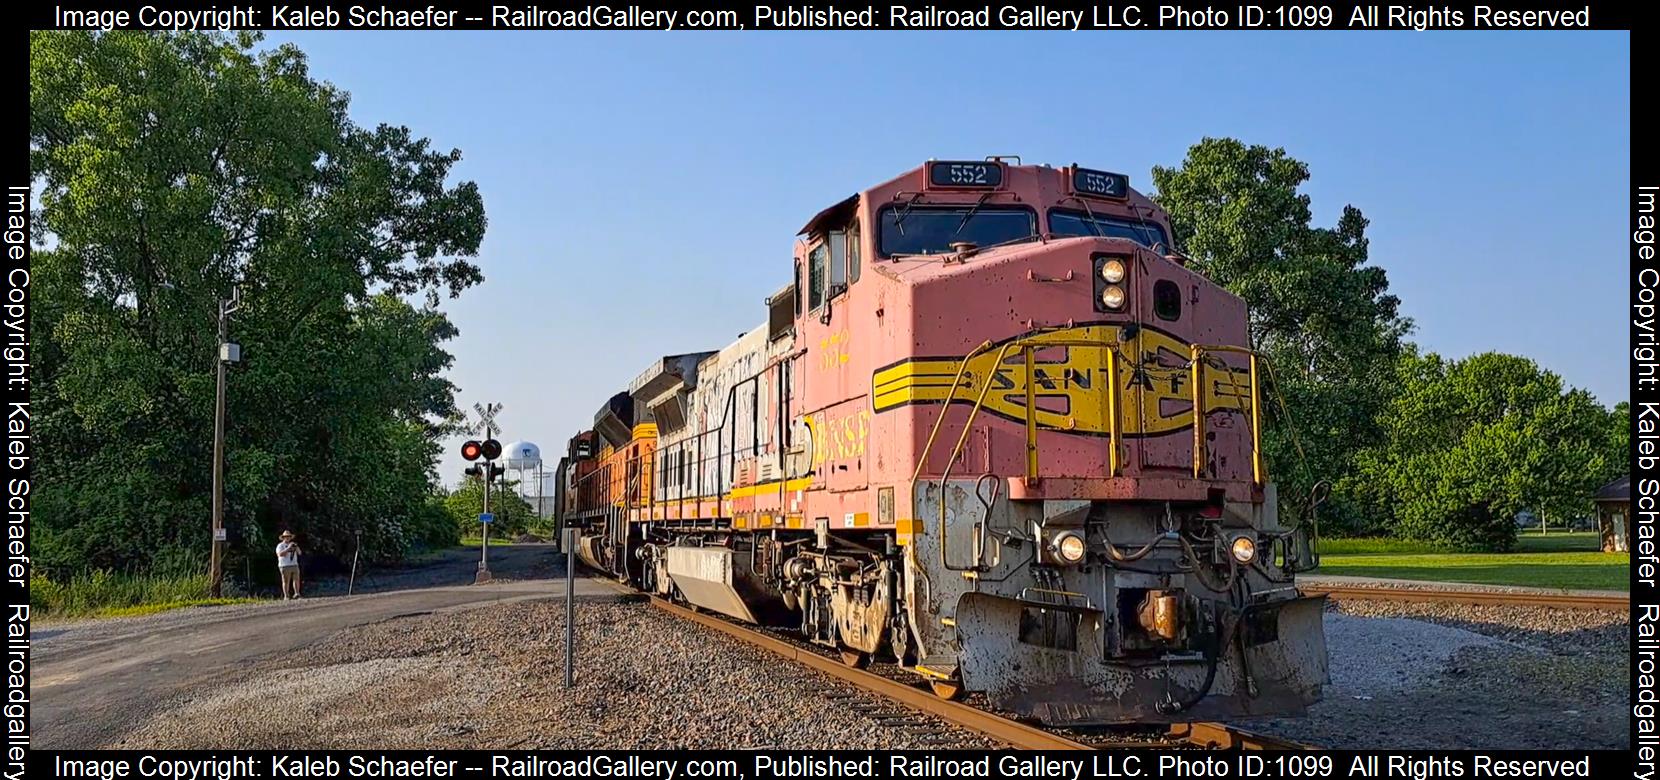 552 is a class B40-8W and  is pictured in Centralia , Illinois, USA.  This was taken along the BNSF Centralia Subdivision  on the BNSF Railway. Photo Copyright: Kaleb Schaefer uploaded to Railroad Gallery on 05/28/2023. This photograph of 552 was taken on Thursday, May 25, 2023. All Rights Reserved. 